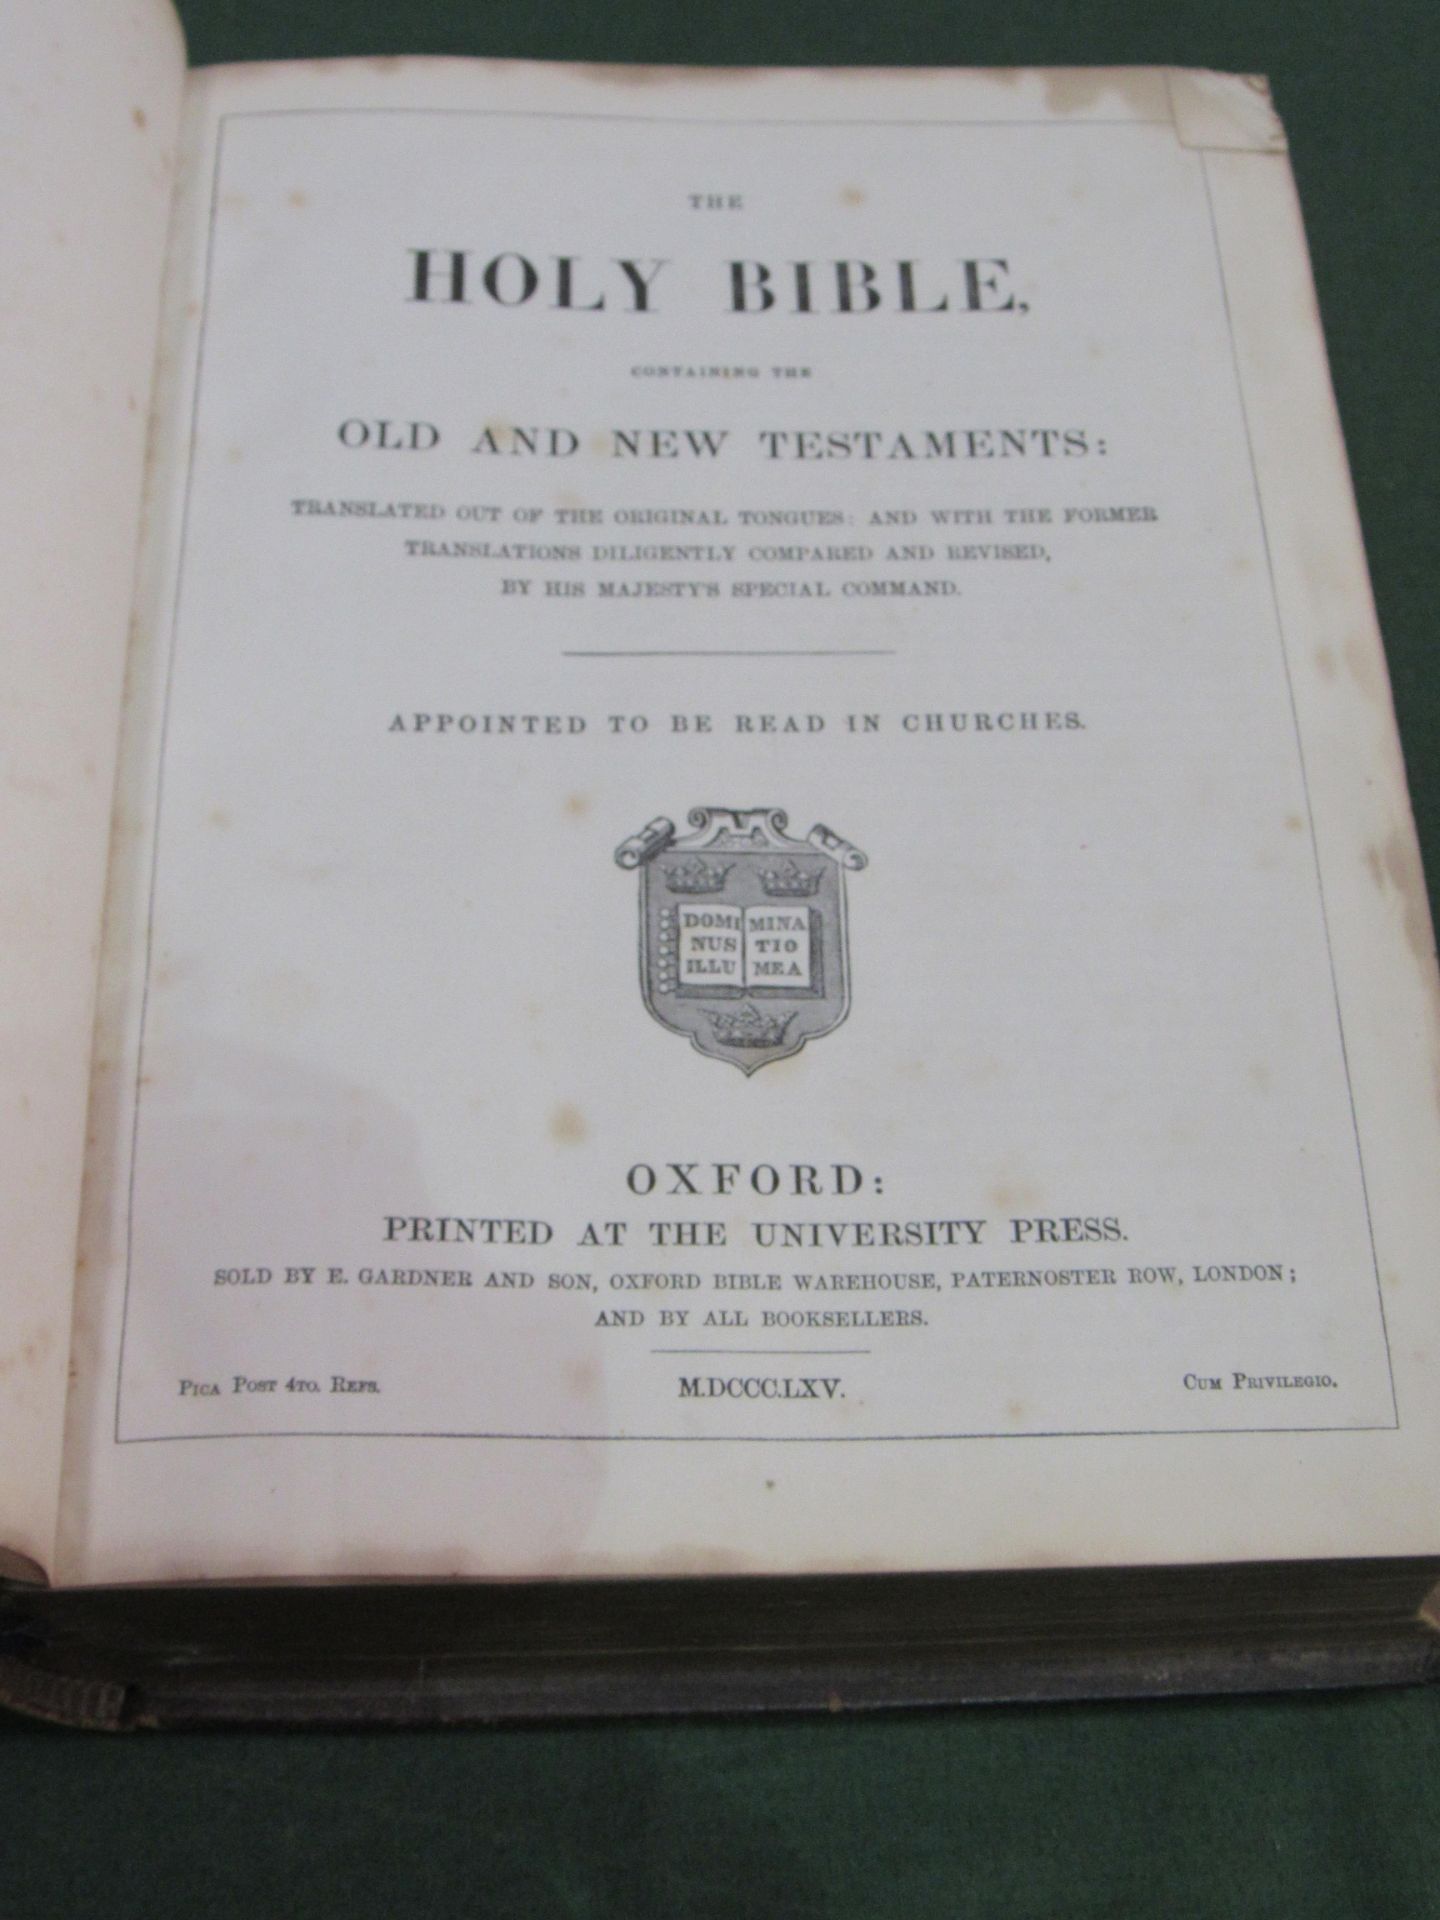 Leather bound Holy Bible, Oxford Press 1865. Estimate £10-20. - Image 2 of 2